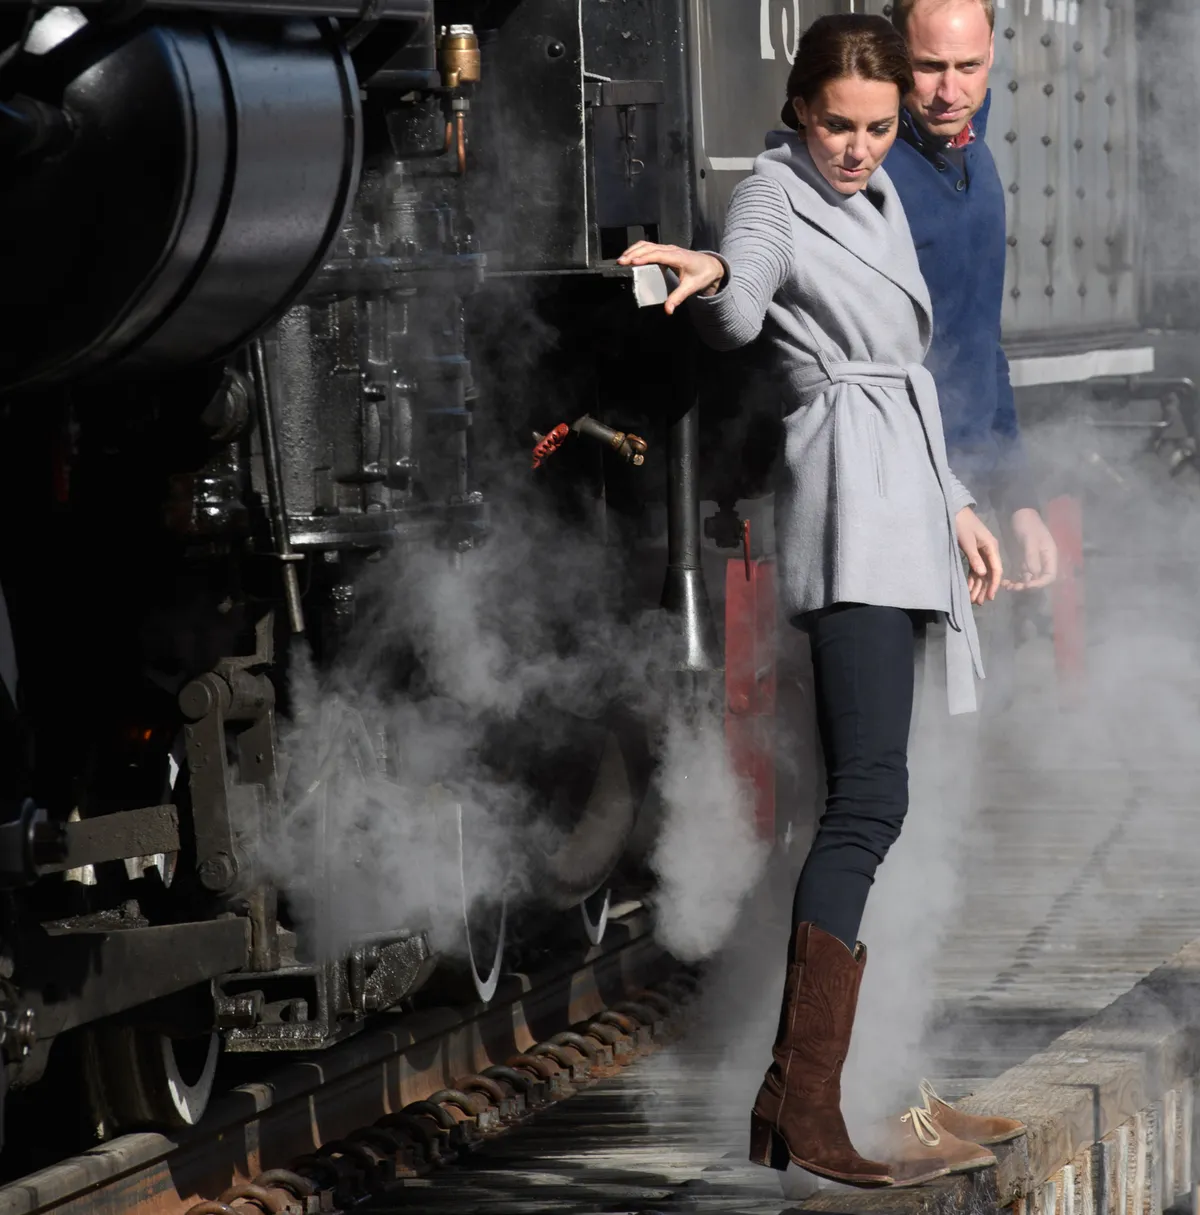 Catherine, Duchess of Cambridge and Prince William, Duke of Cambridge view a steam train as they visit Montana mountain Carcross.